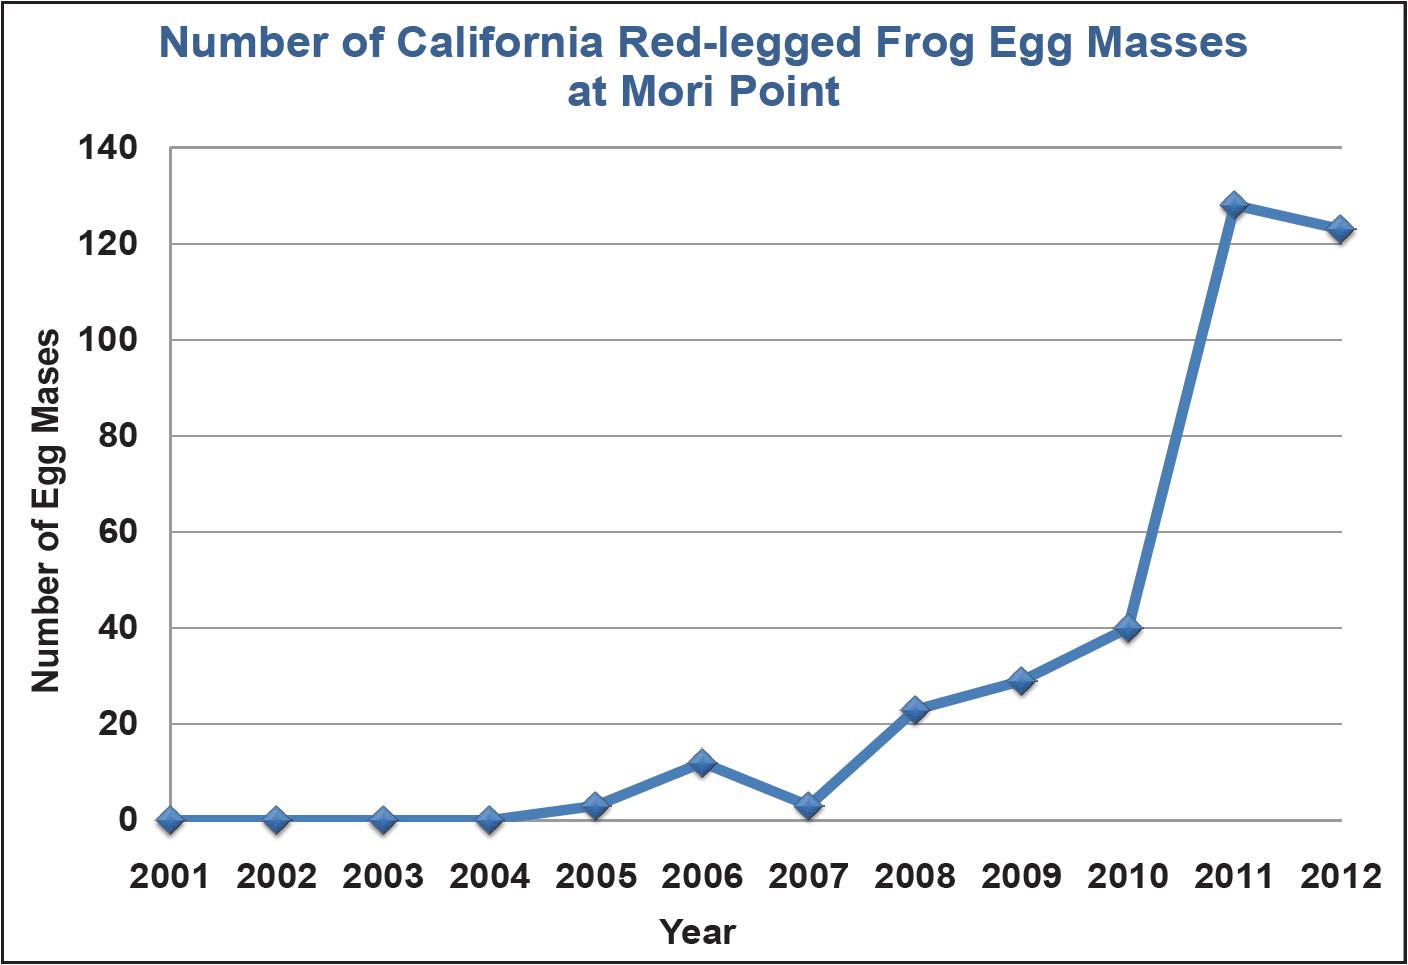 Graph showing that the number of red-legged frog egg masses at Mori Point has increased from 0 to over 120 since the ponds were built in 2004.